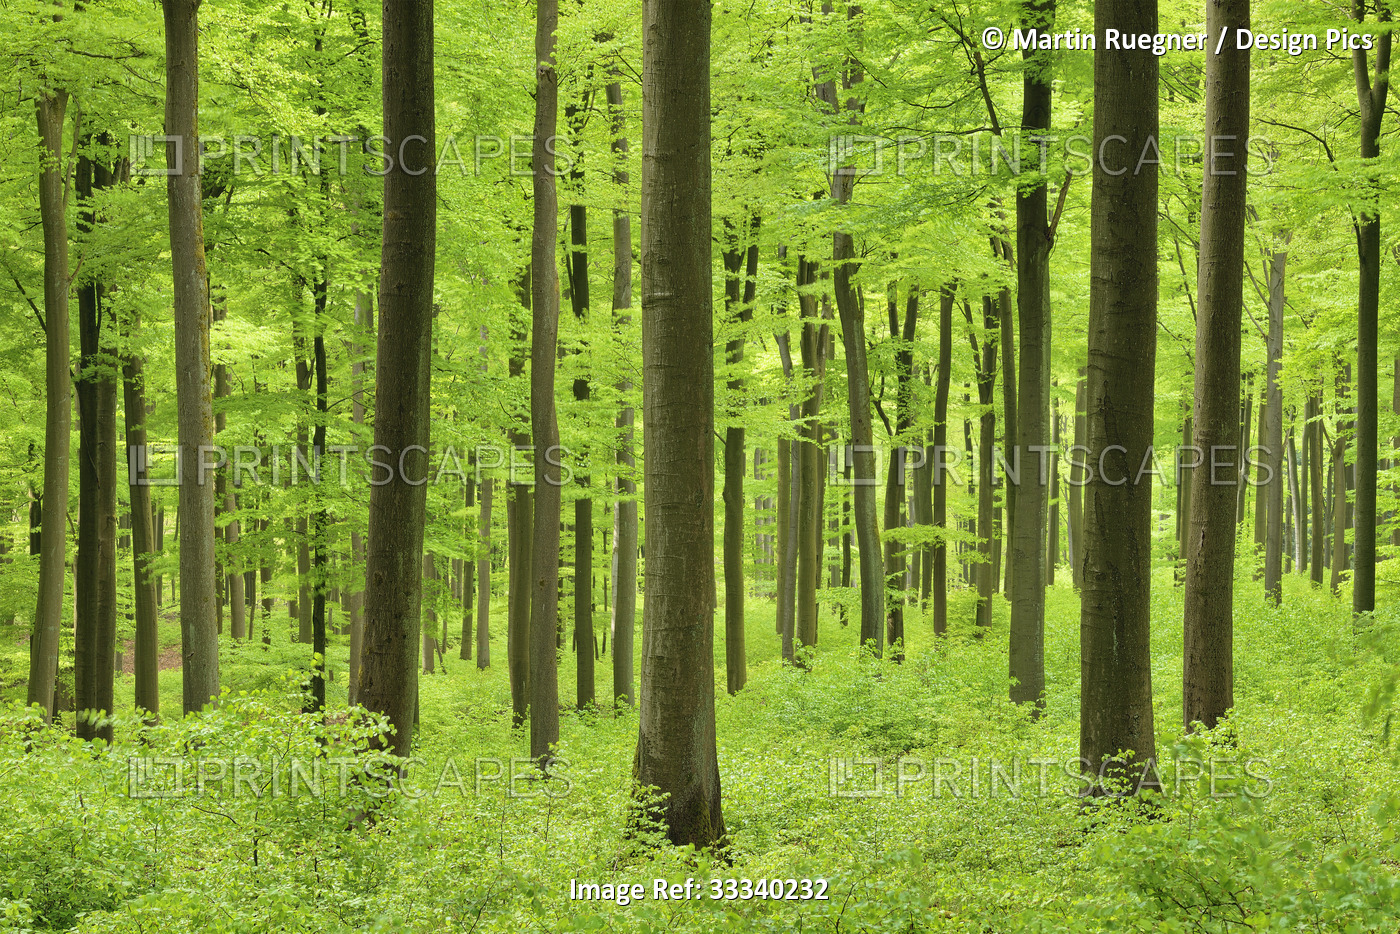 Bright green foliage in a forest; Rhineland-Palatinate, Germany